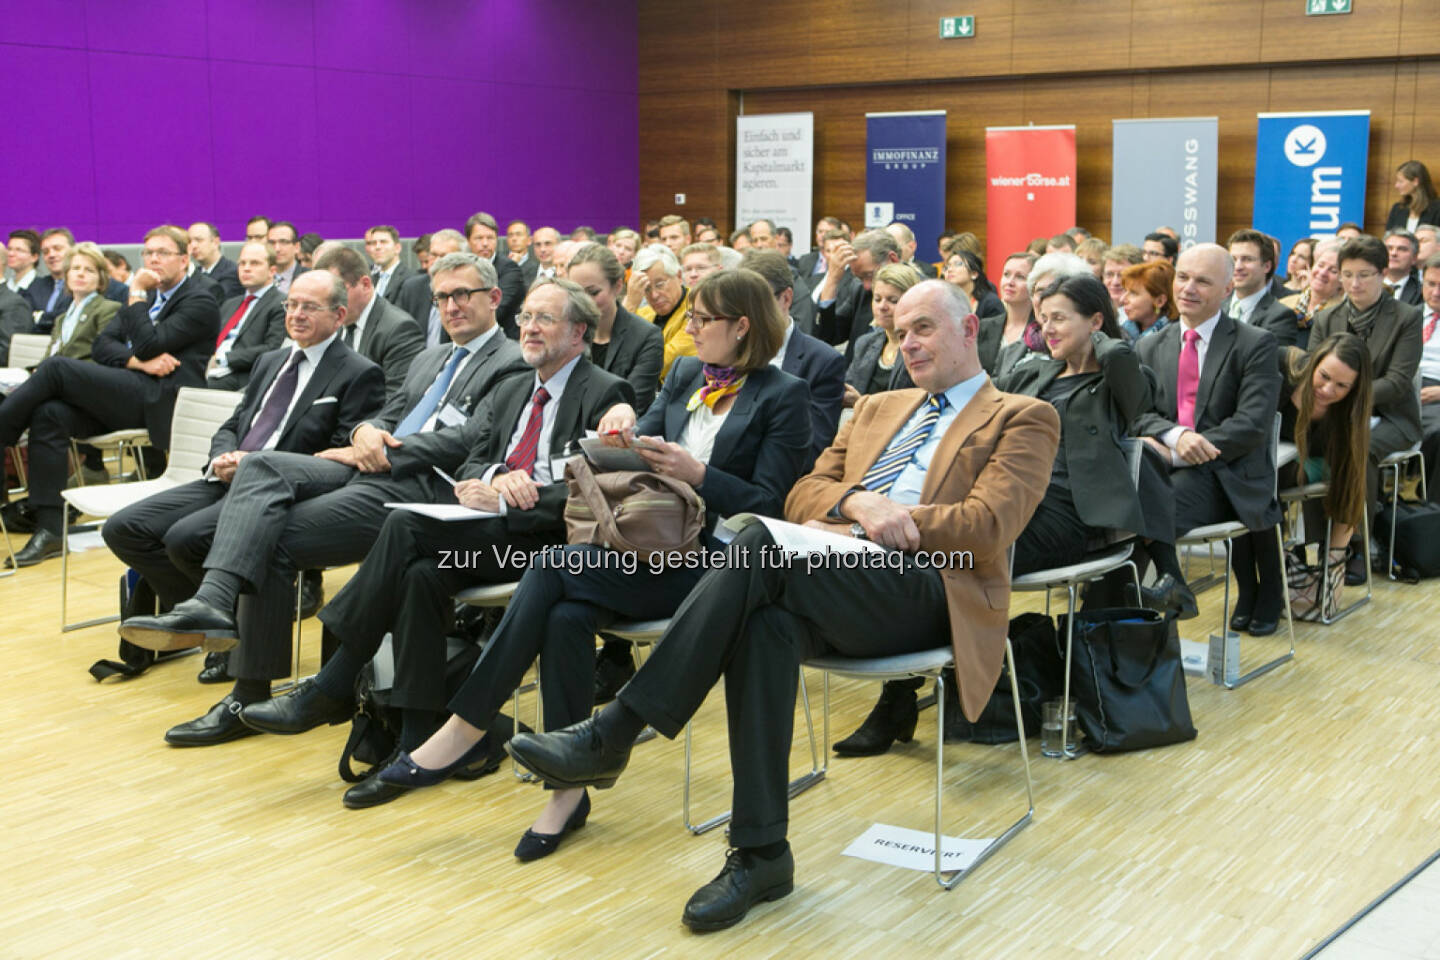 Austrian Equity Day 2013